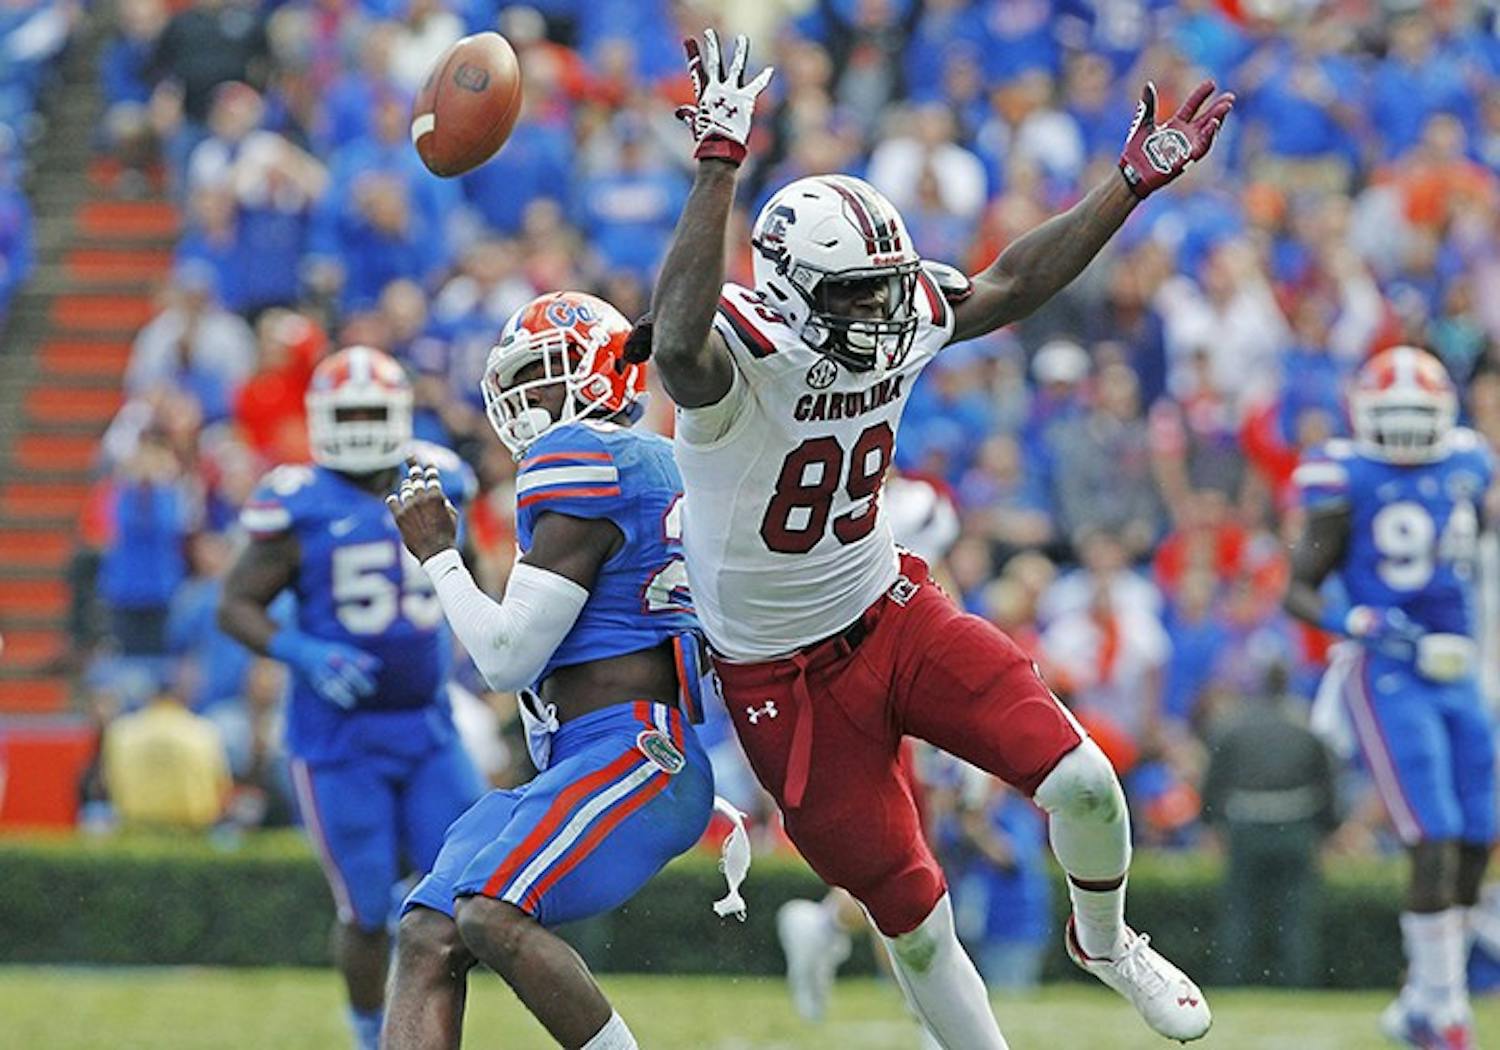 Florida defensive back Marcus Maye (20) is called for a pass interference after bumping South Carolina tight end Jerell Adams (89) on a pass play in the fourth quarter at Ben Hill Griffin Stadium in Gainesville, Fla., Saturday, Nov. 15, 2014. The visiting Gamecocks won, 23-20, in overtime. (Gerry Melendez/The State/MCT)